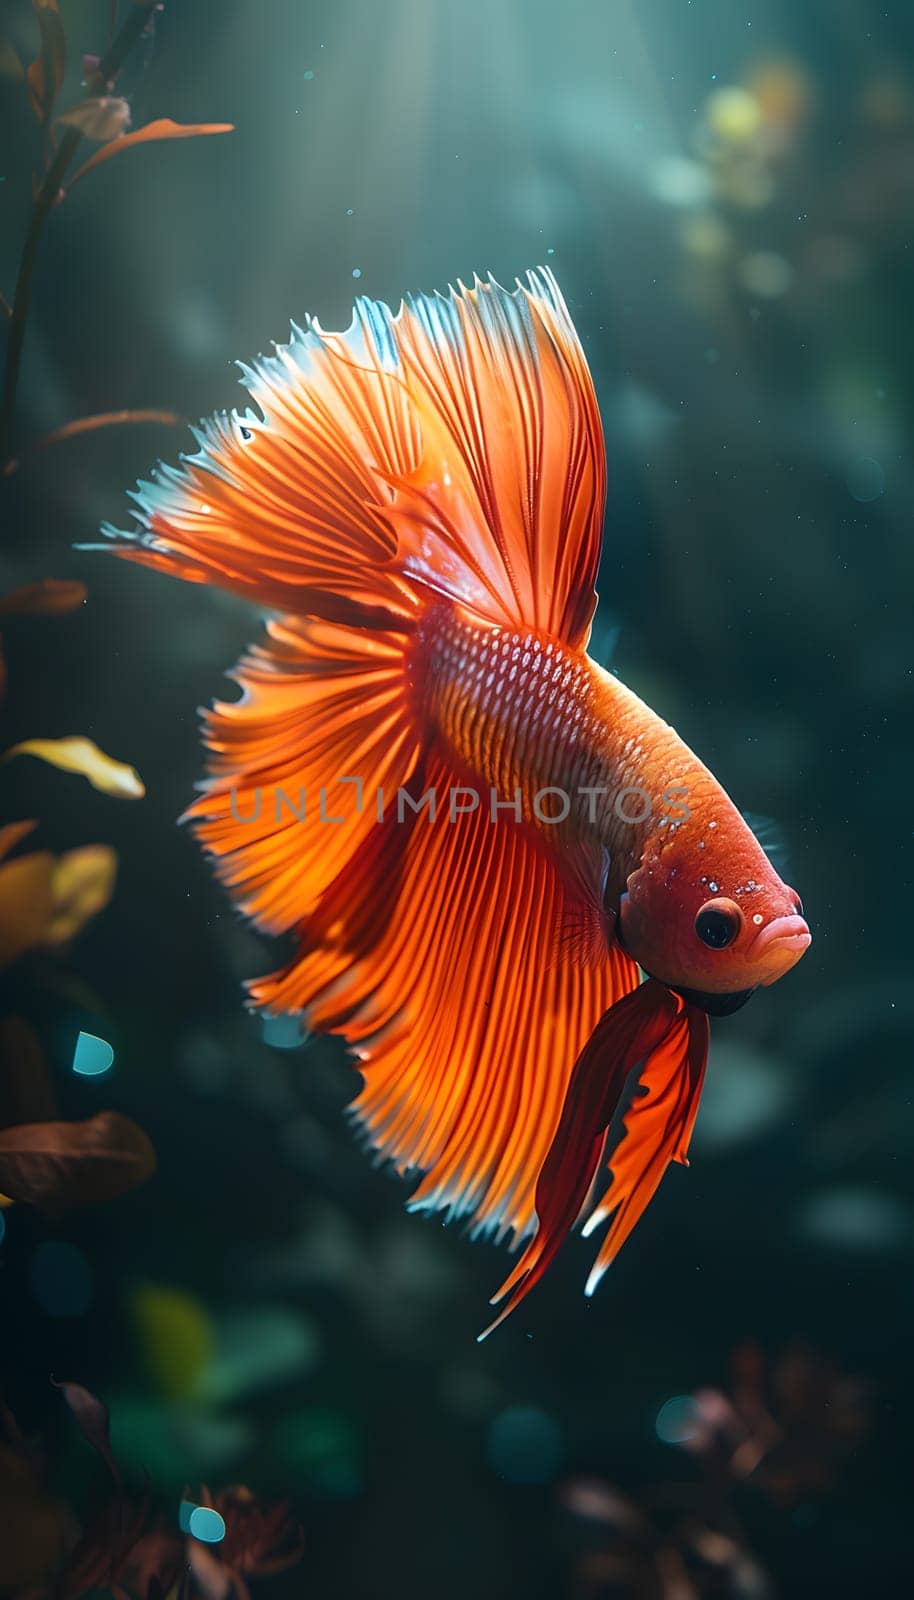 A red betta fish swims in an underwater tank with other organisms by Nadtochiy